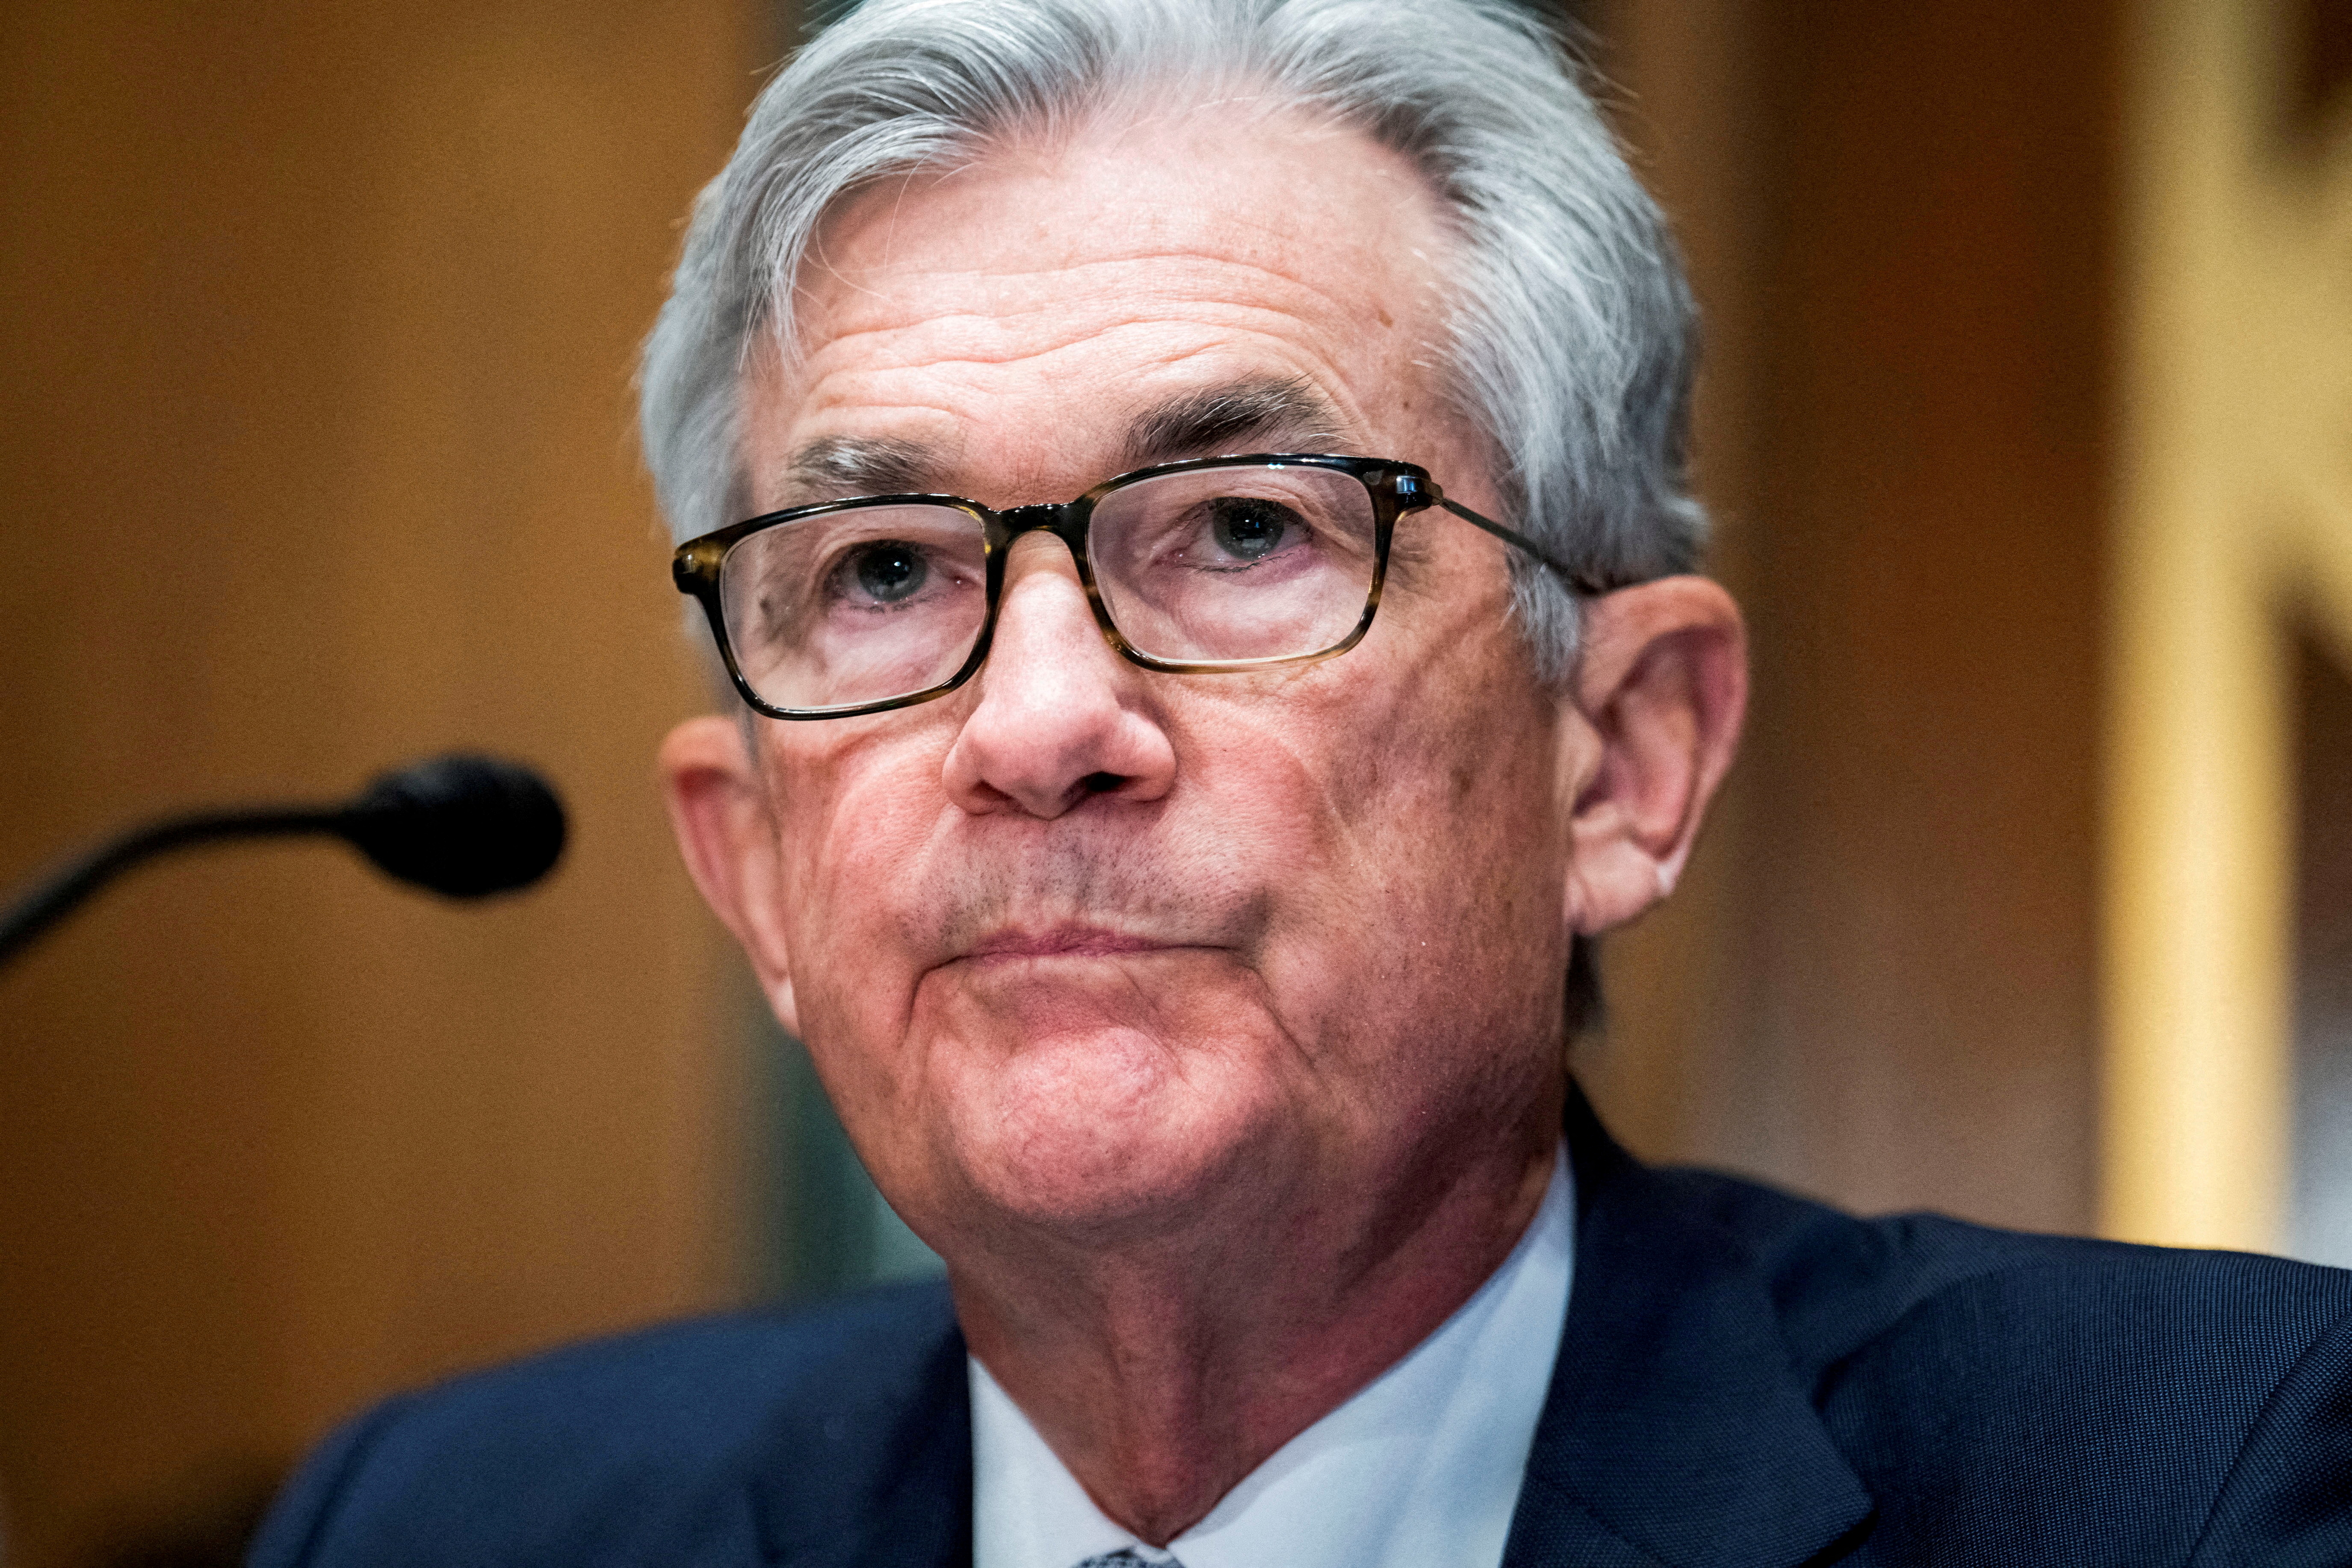 U.S. Senate Confirms Jerome Powell for 2nd Term as Fed Chief in Bipartisan Vote